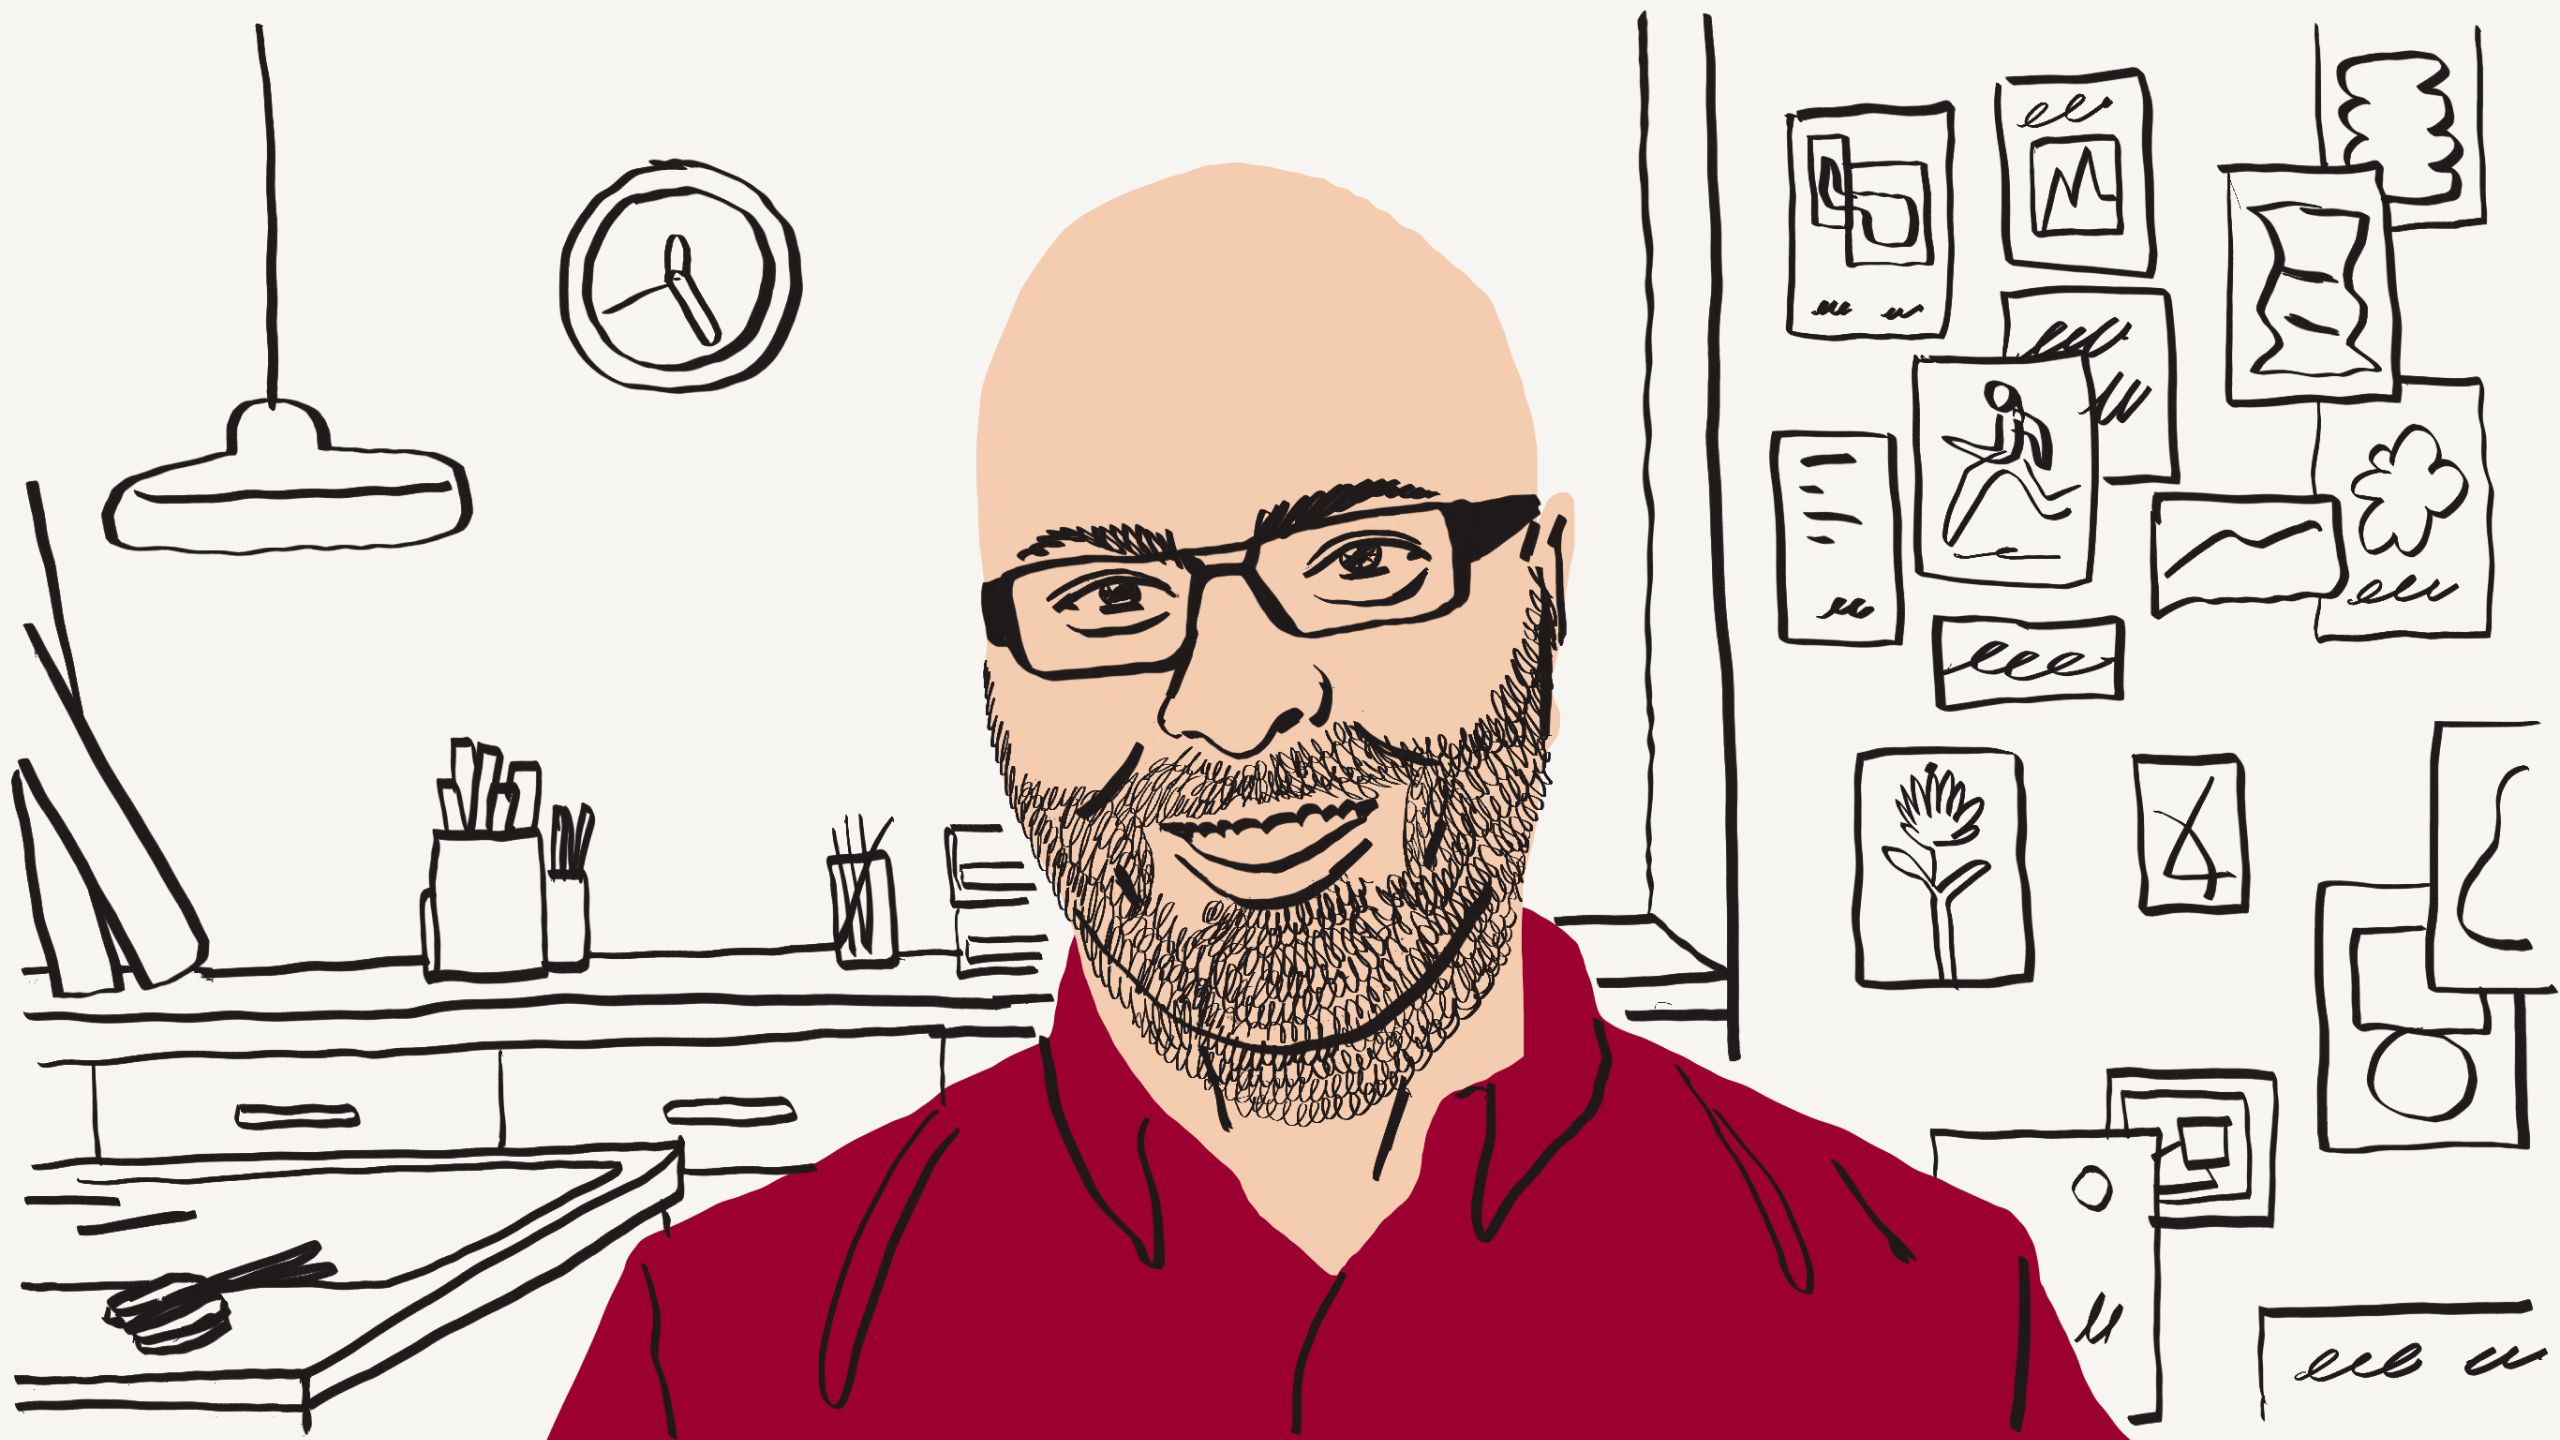 Illustration of a person with glasses wearing a red shirt in front of a desk